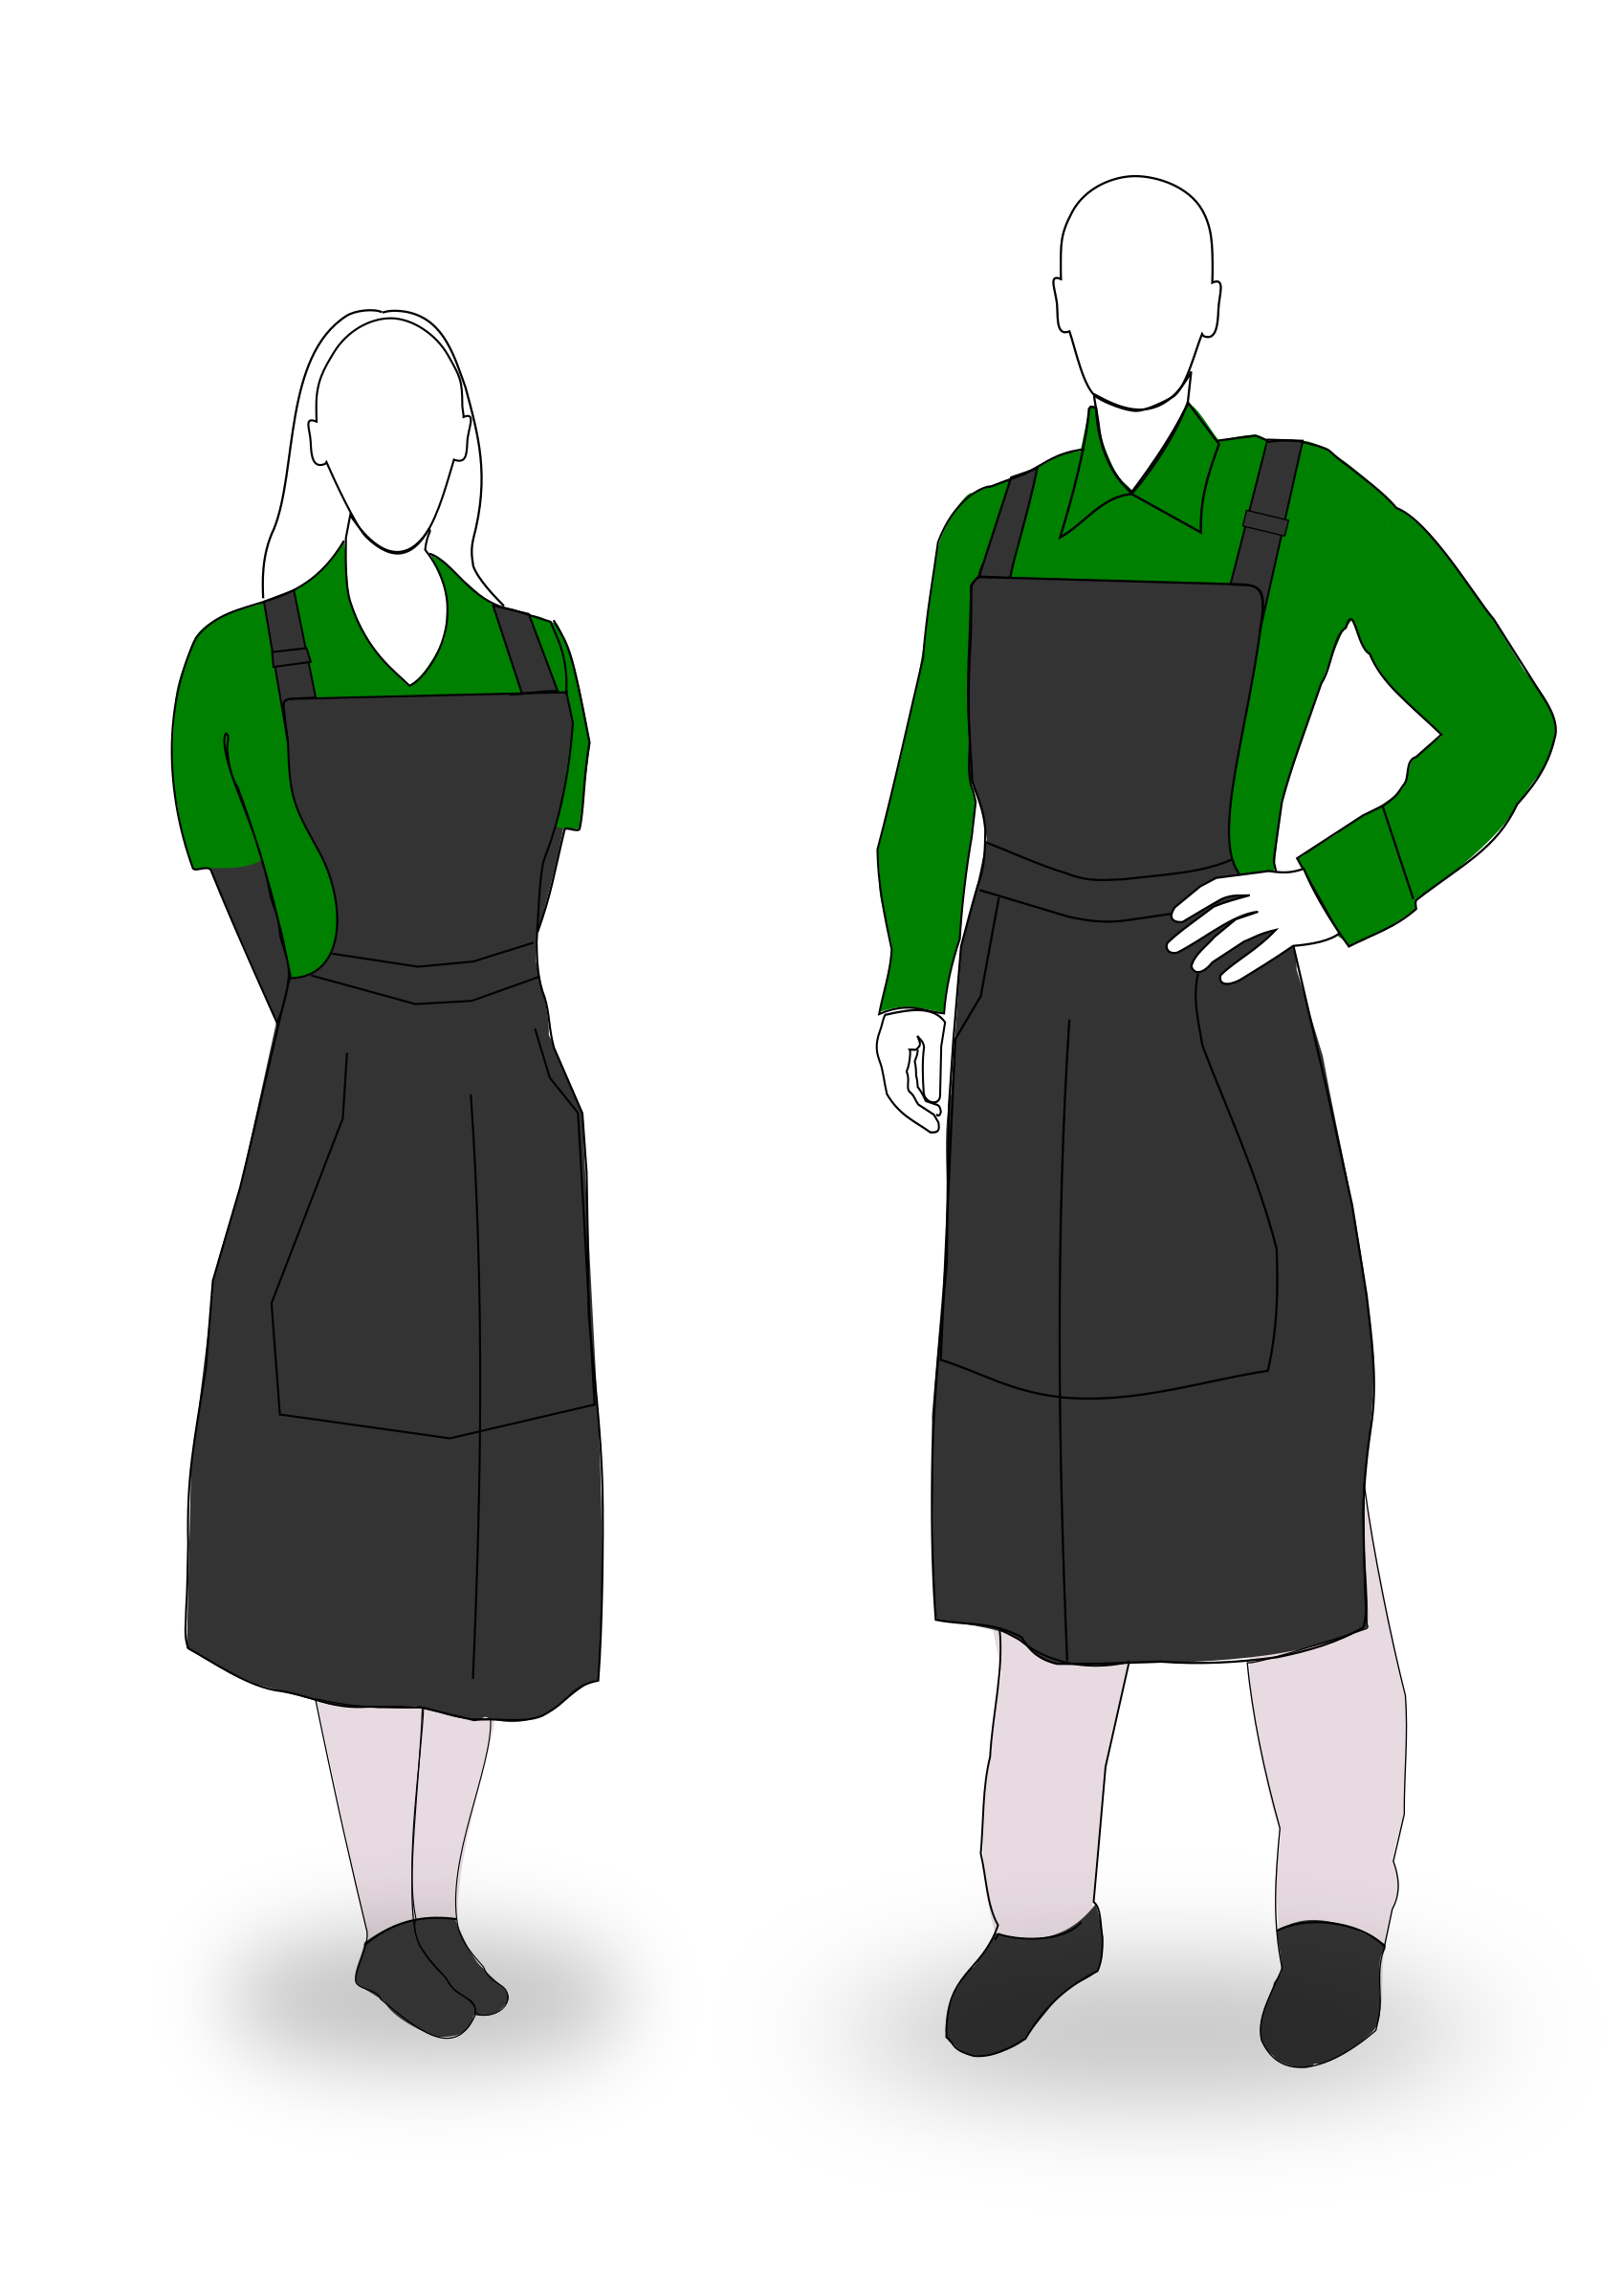 Waiting staff icons png. Waitress clipart fashion